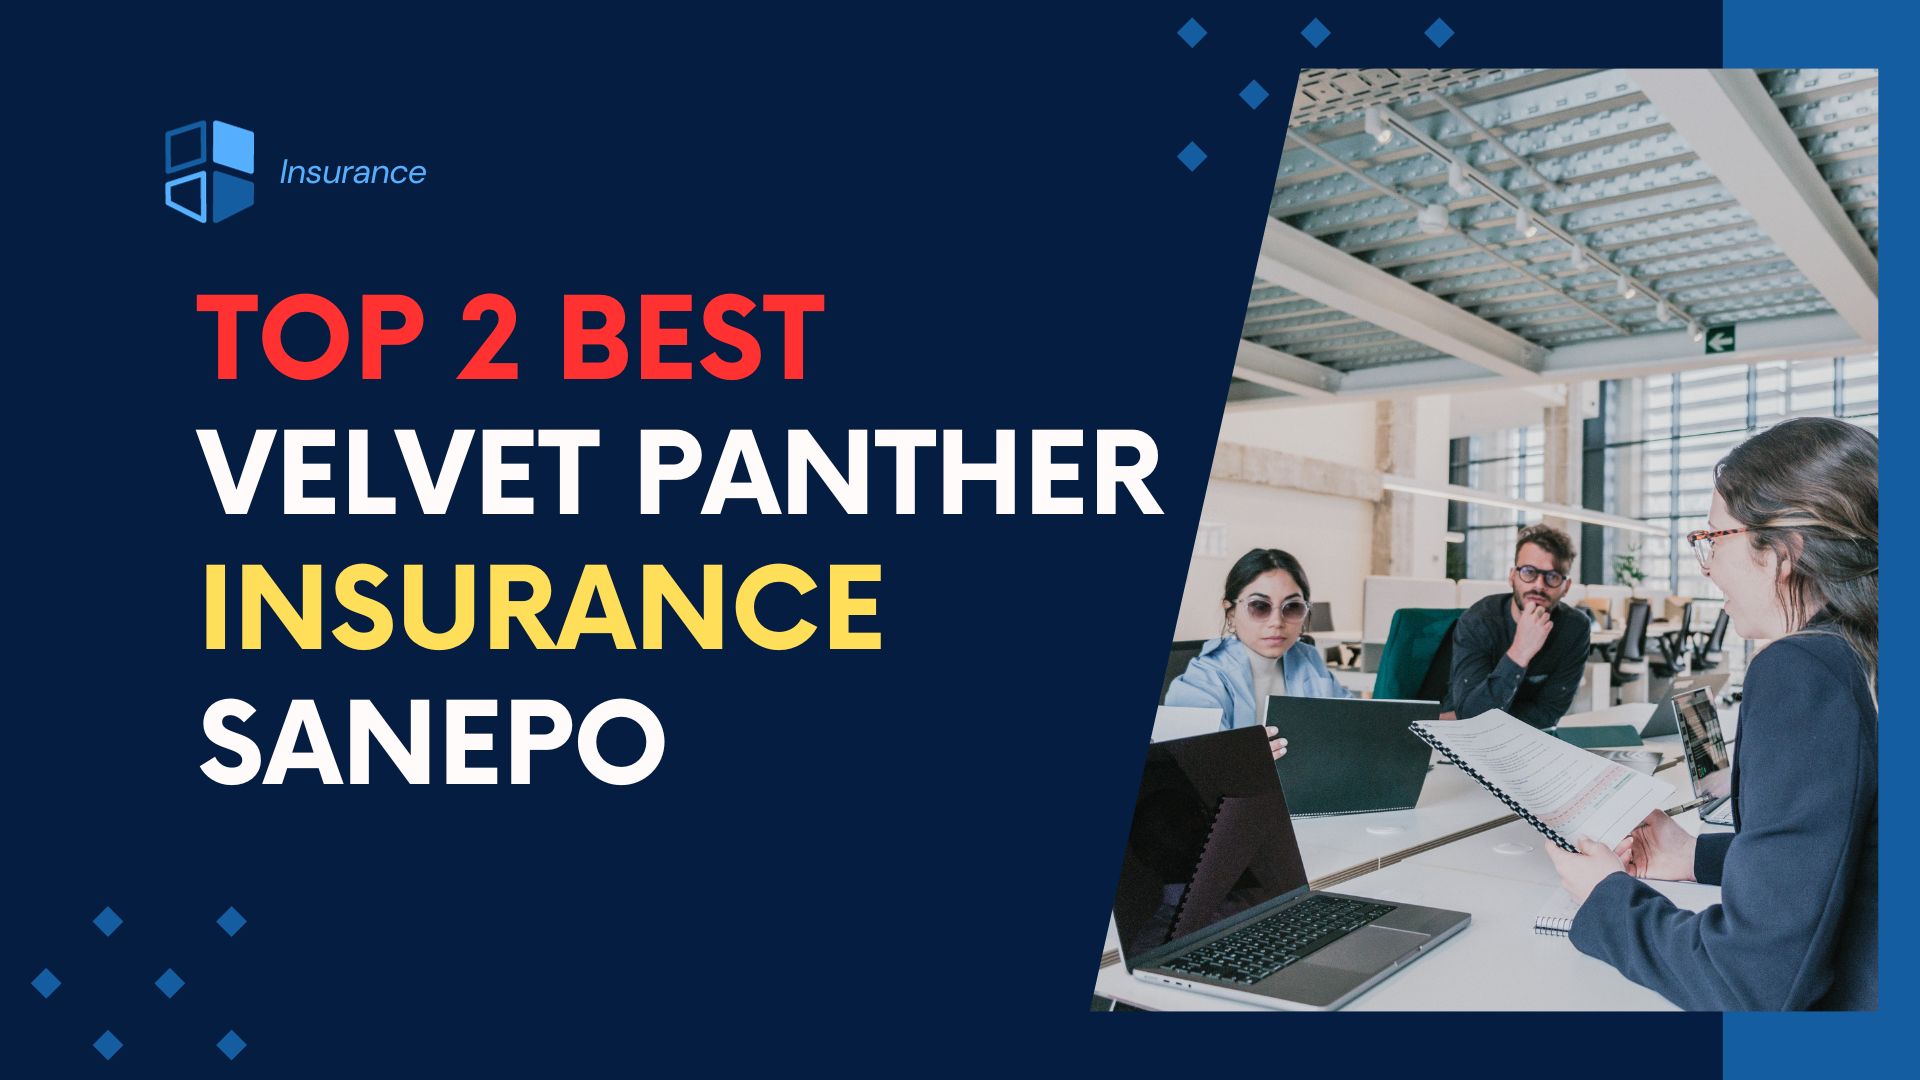 You are currently viewing Top 2 Best Velvet Panther Insurance Sanepo